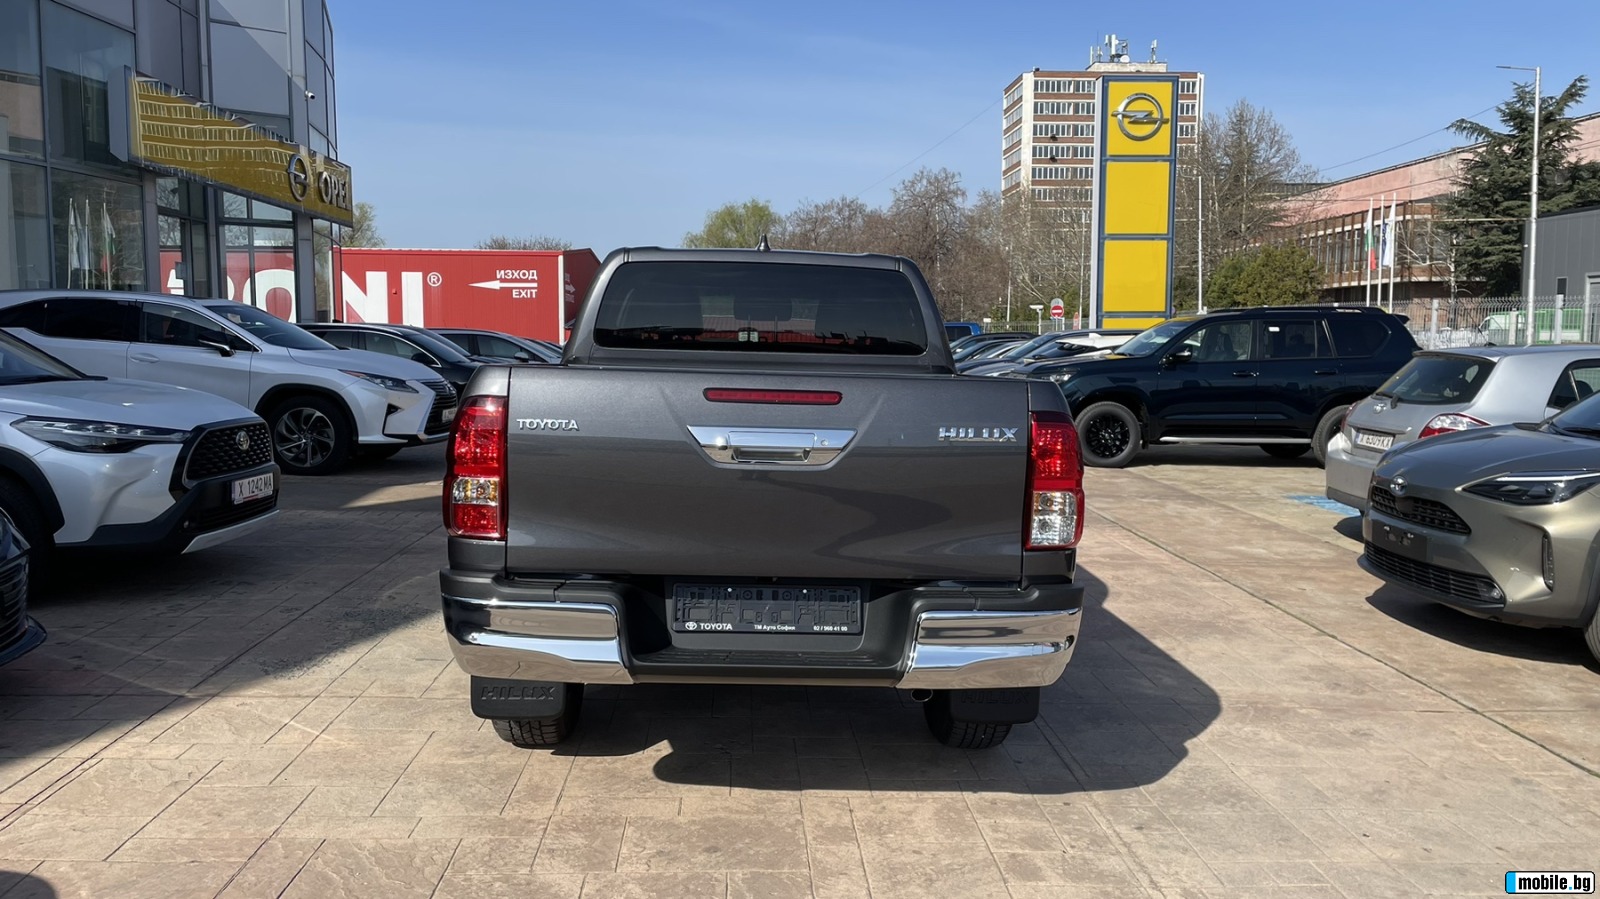 Toyota Hilux STYLE 6AT | Mobile.bg   5